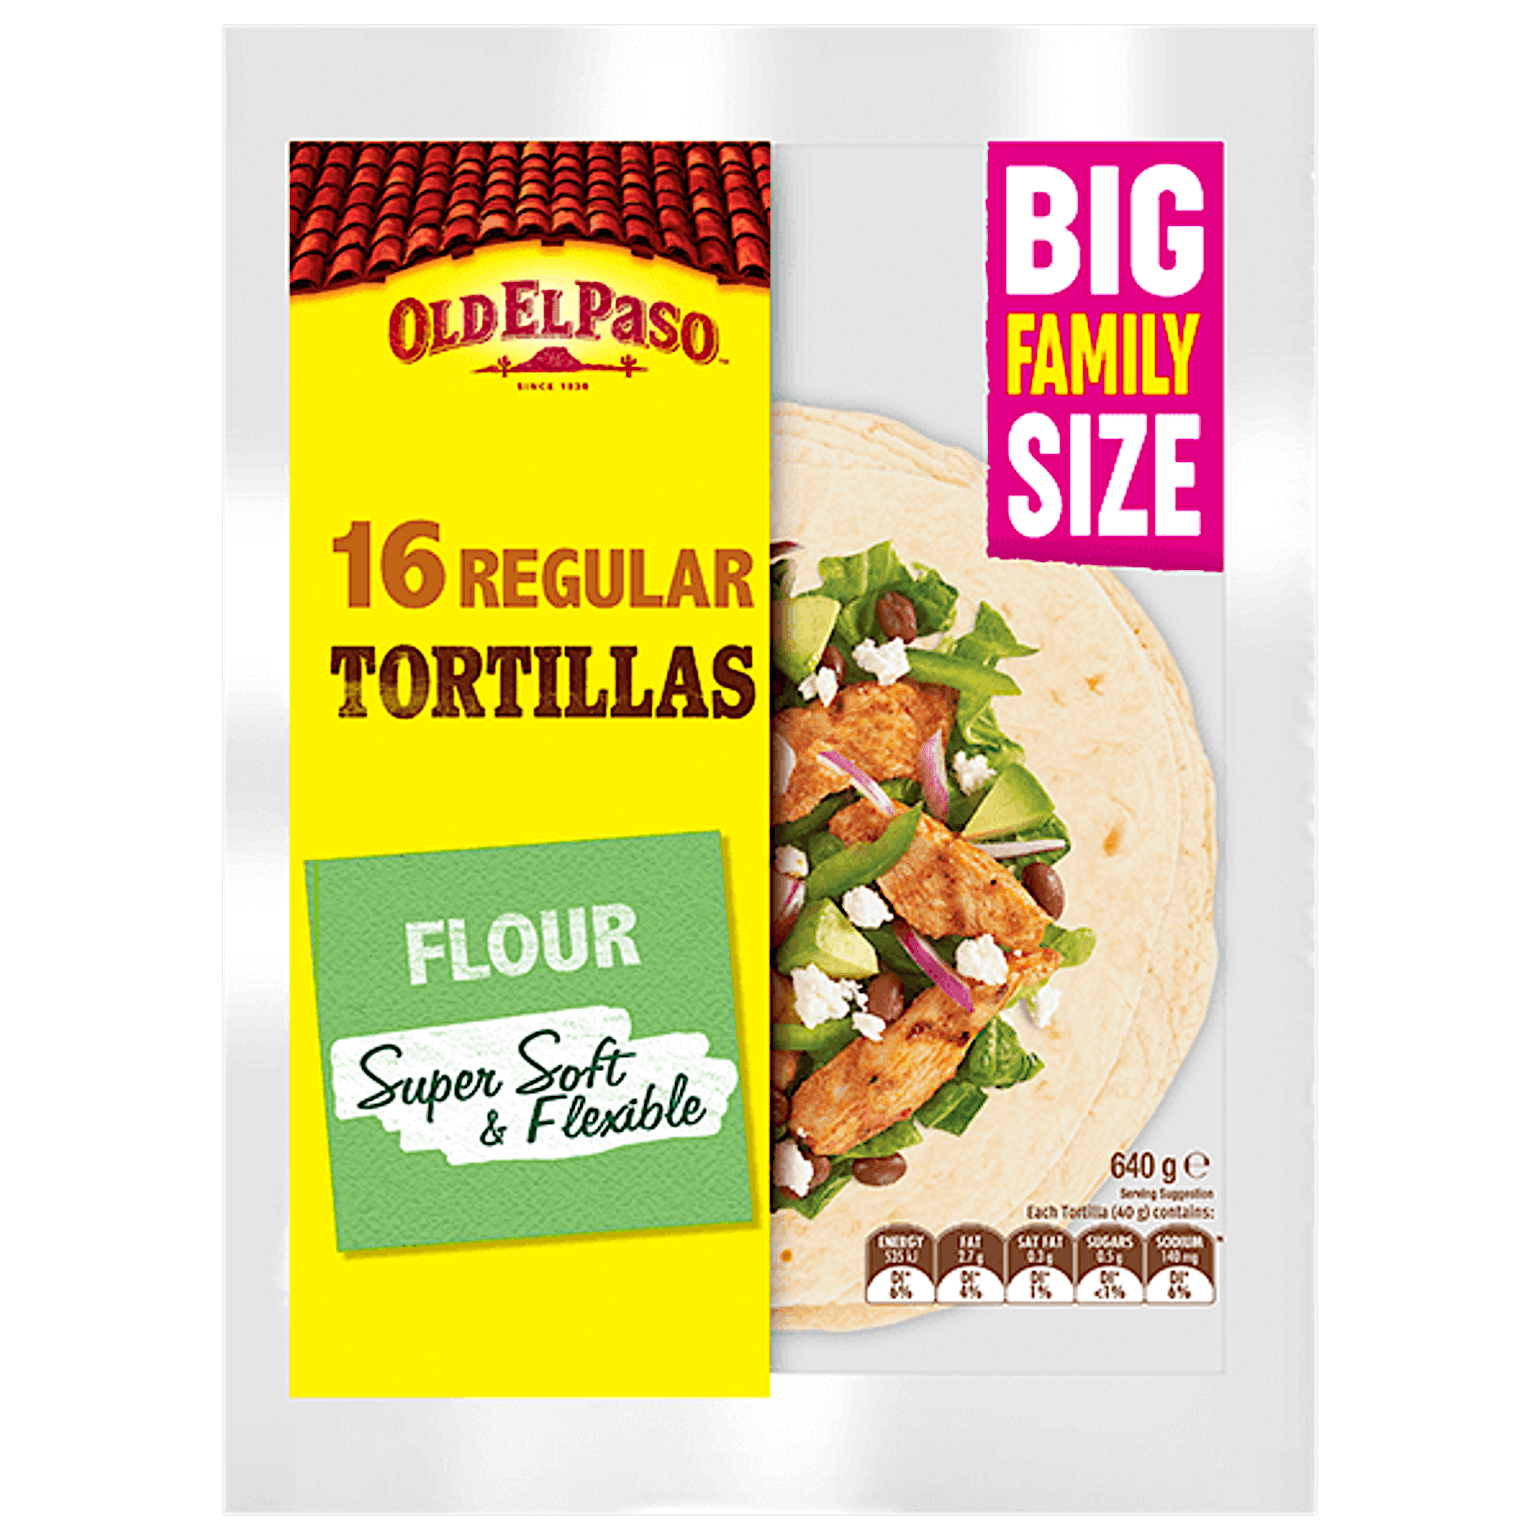 a family size pack of Old El Paso's 16 regular flour tortillas (640g)